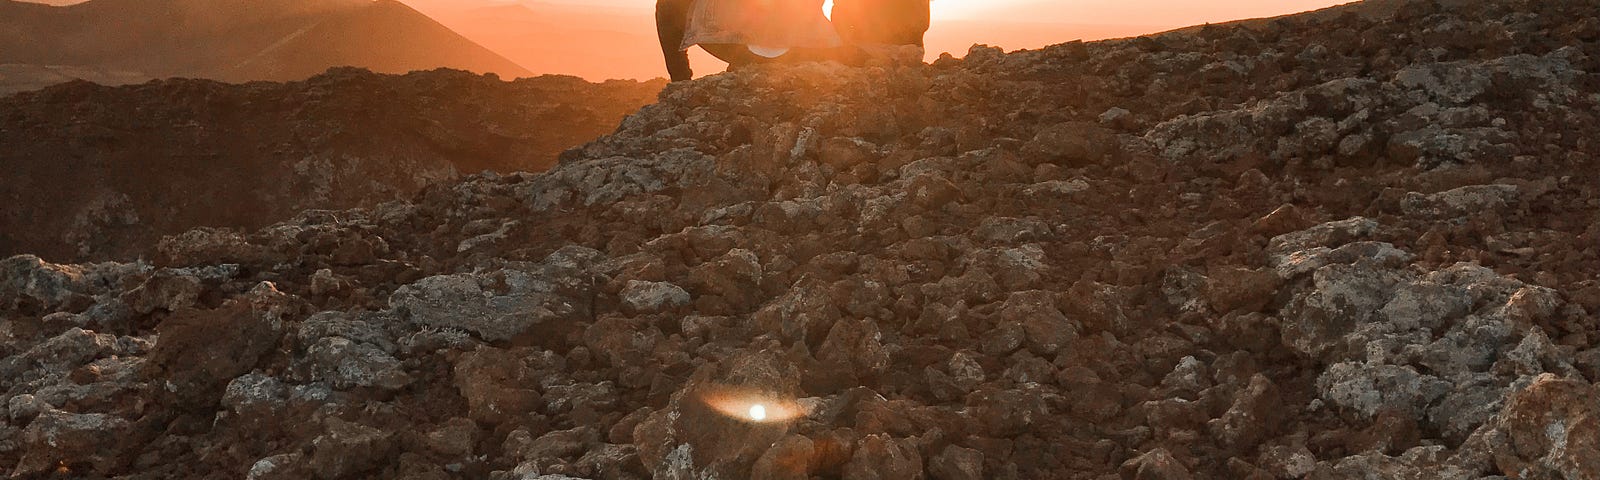 Sunset or sunrise over a rocky environment with mountains in the distance. Two people, probably male and female, sitting near each other in silhouette against the bright sun.